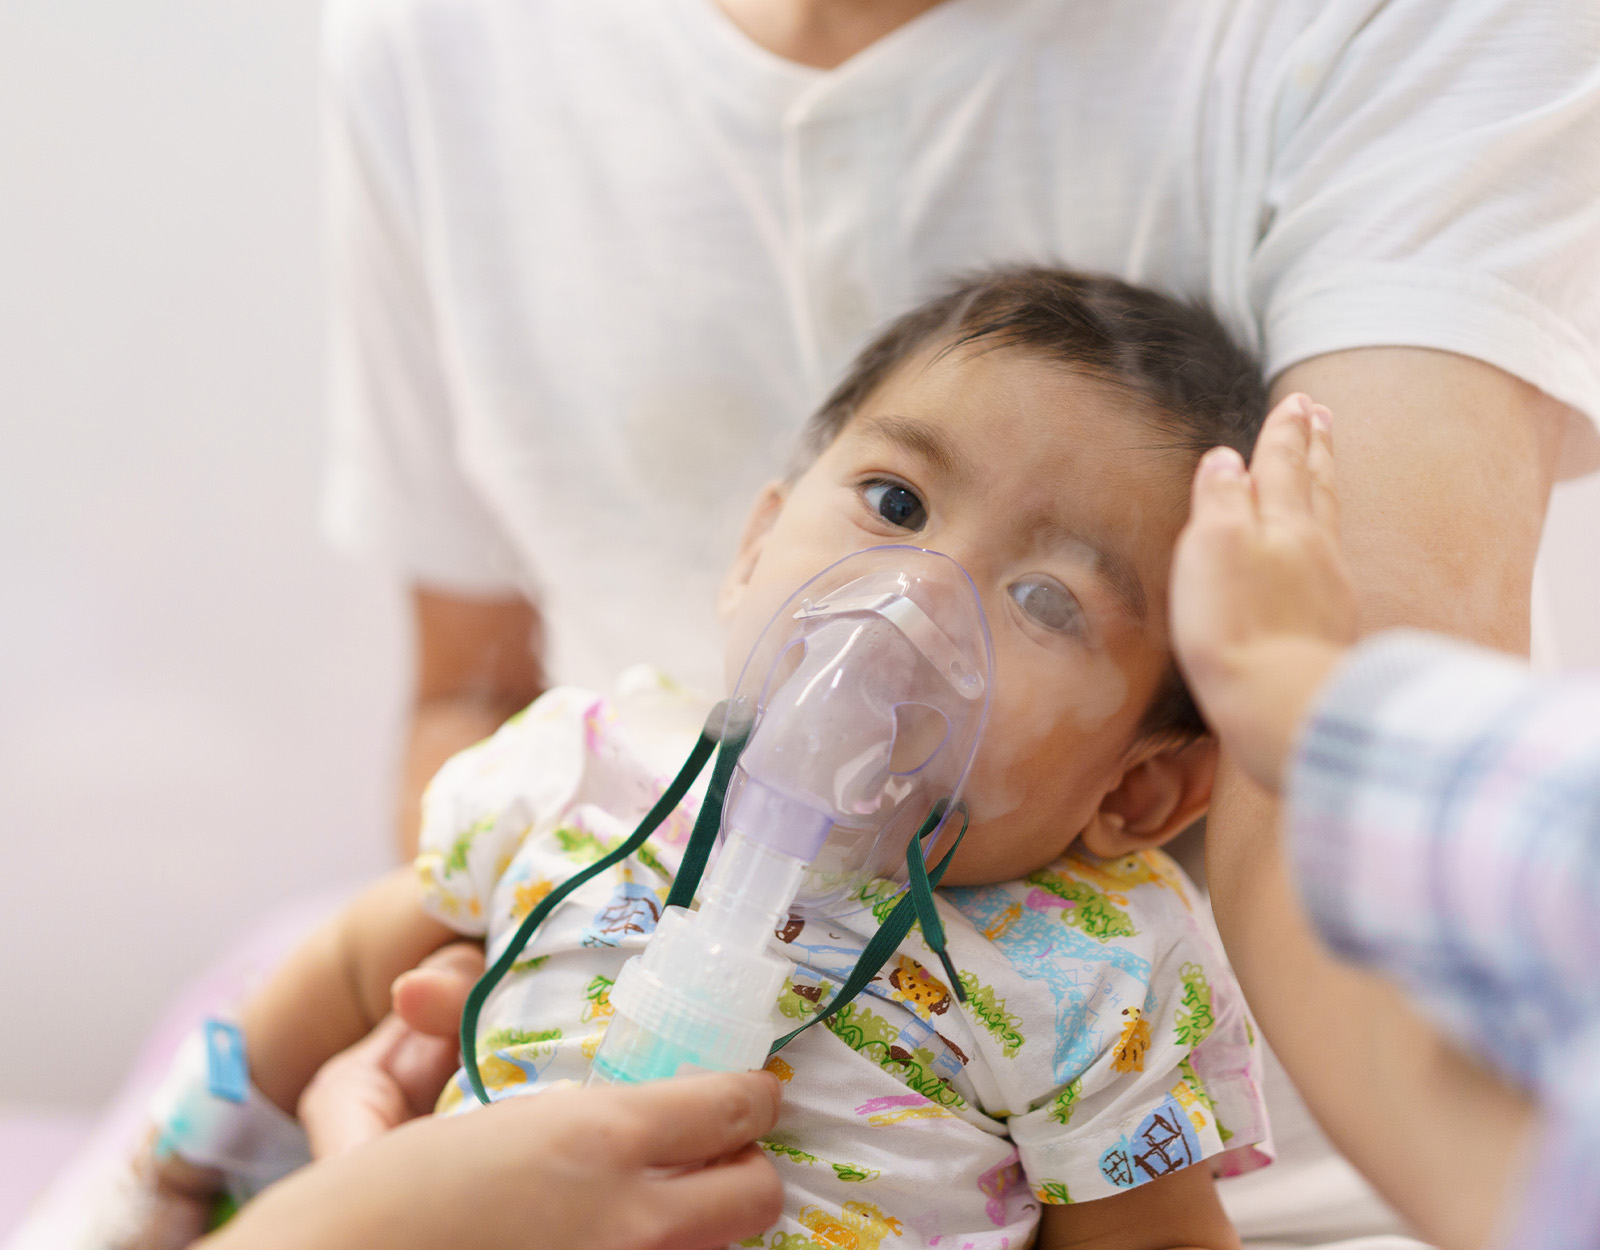 Why We Should Protect Our Kids and Babies From Pneumonia